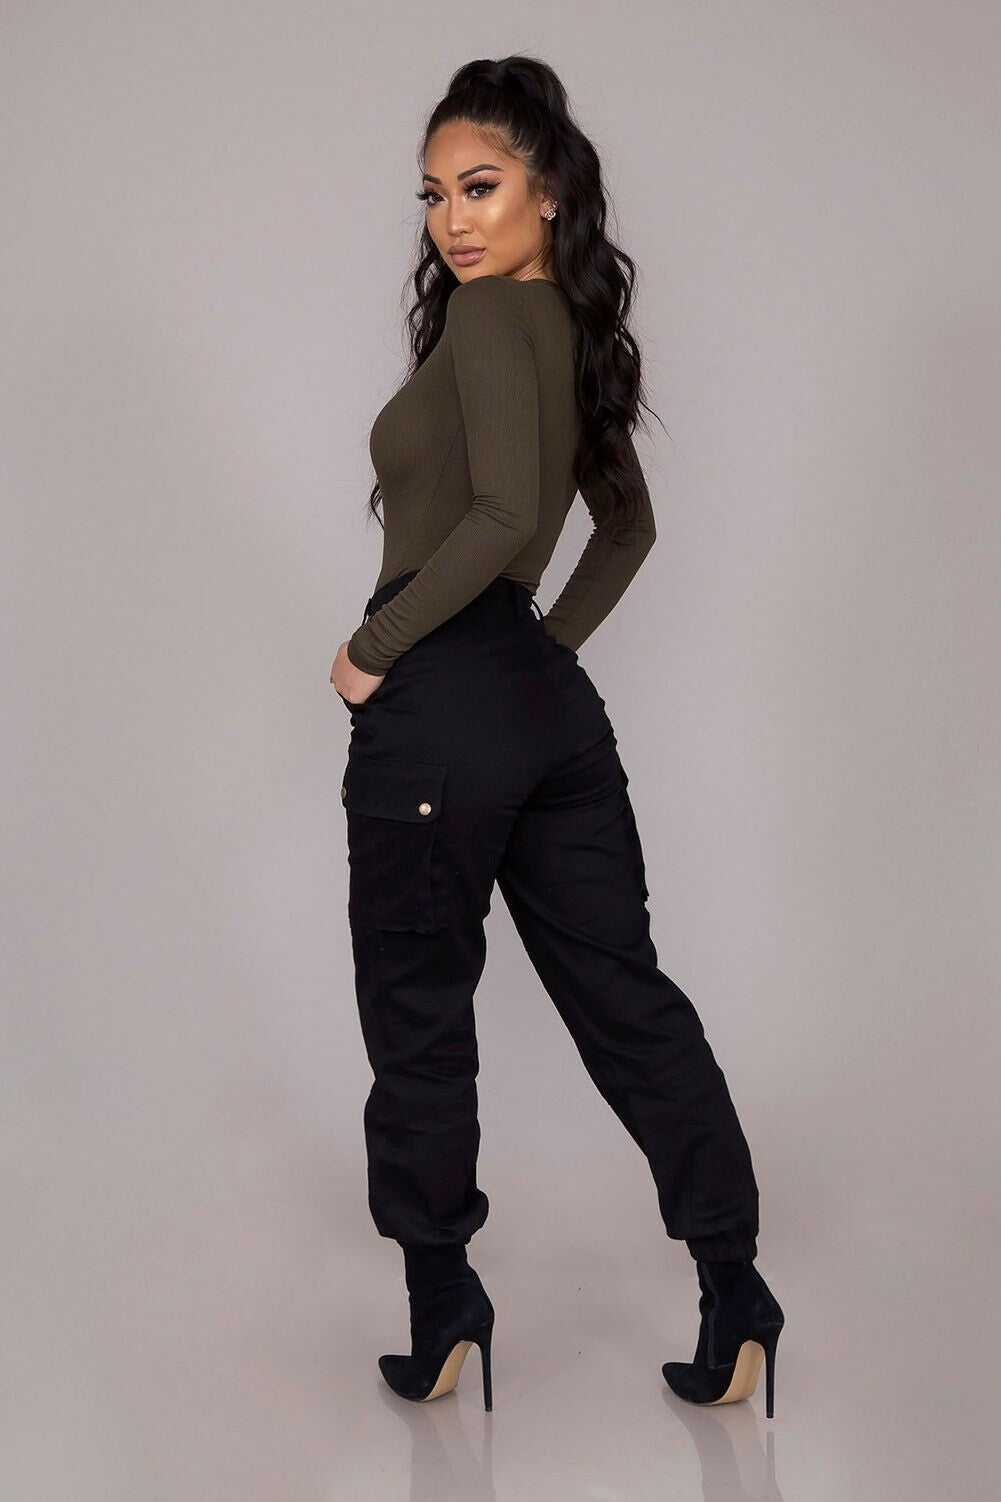 OOTDGIRL Stylish Women Cargo Pants High Waist Black Pants Button Pockets Design Gothic Style Trousers Solid Color Long Trouser Plus Size